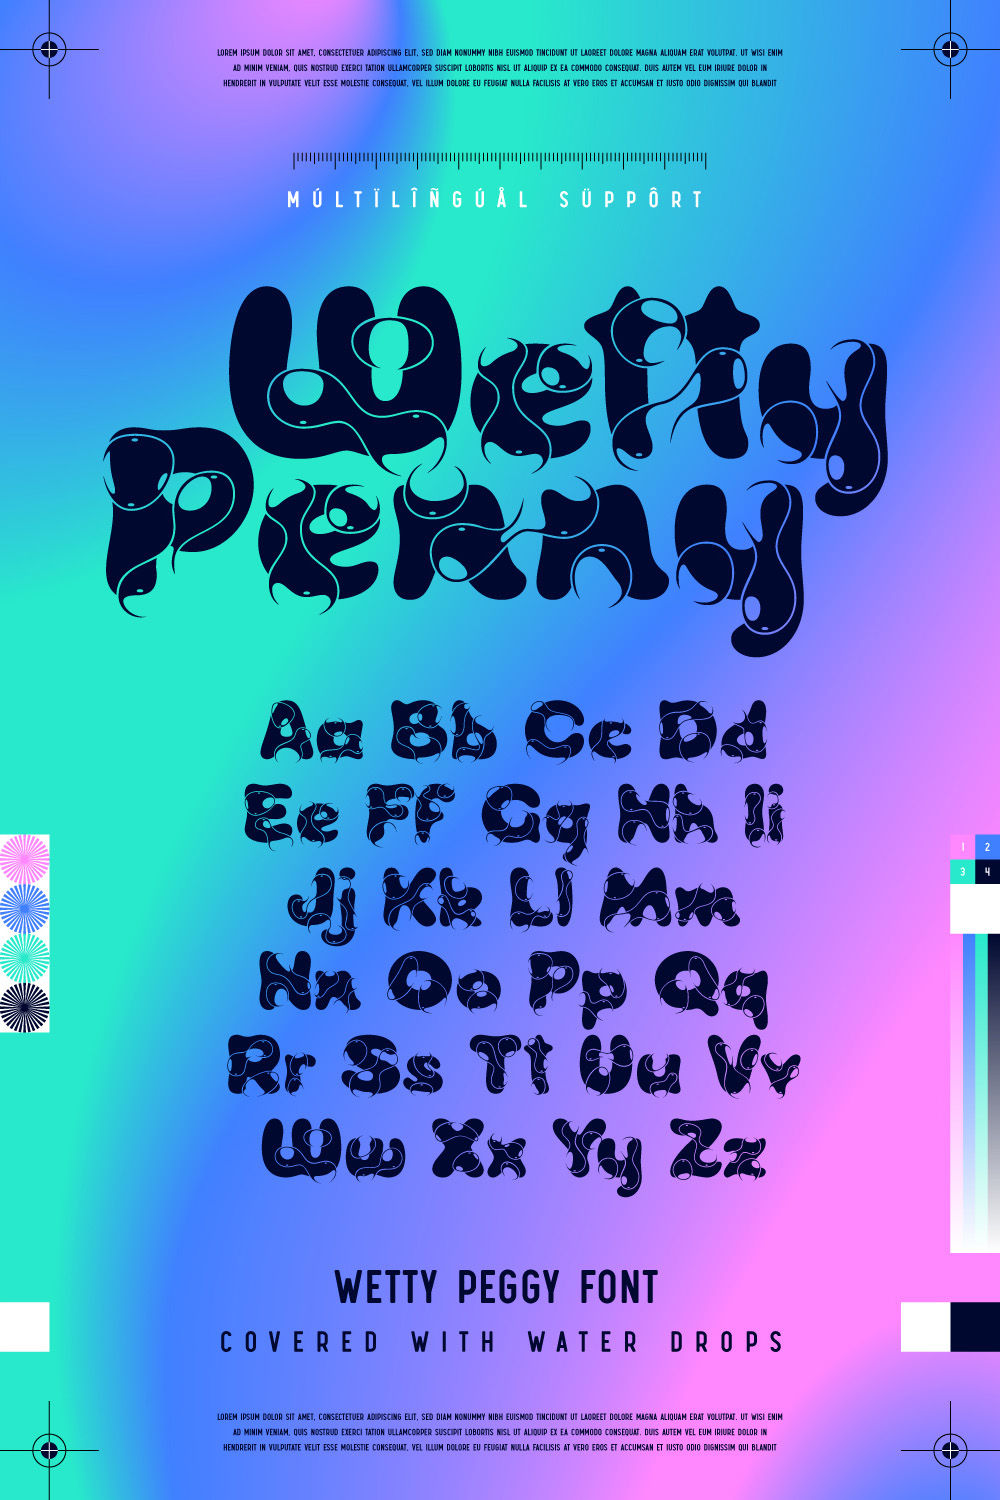 Wetty Penny font pinterest preview image.